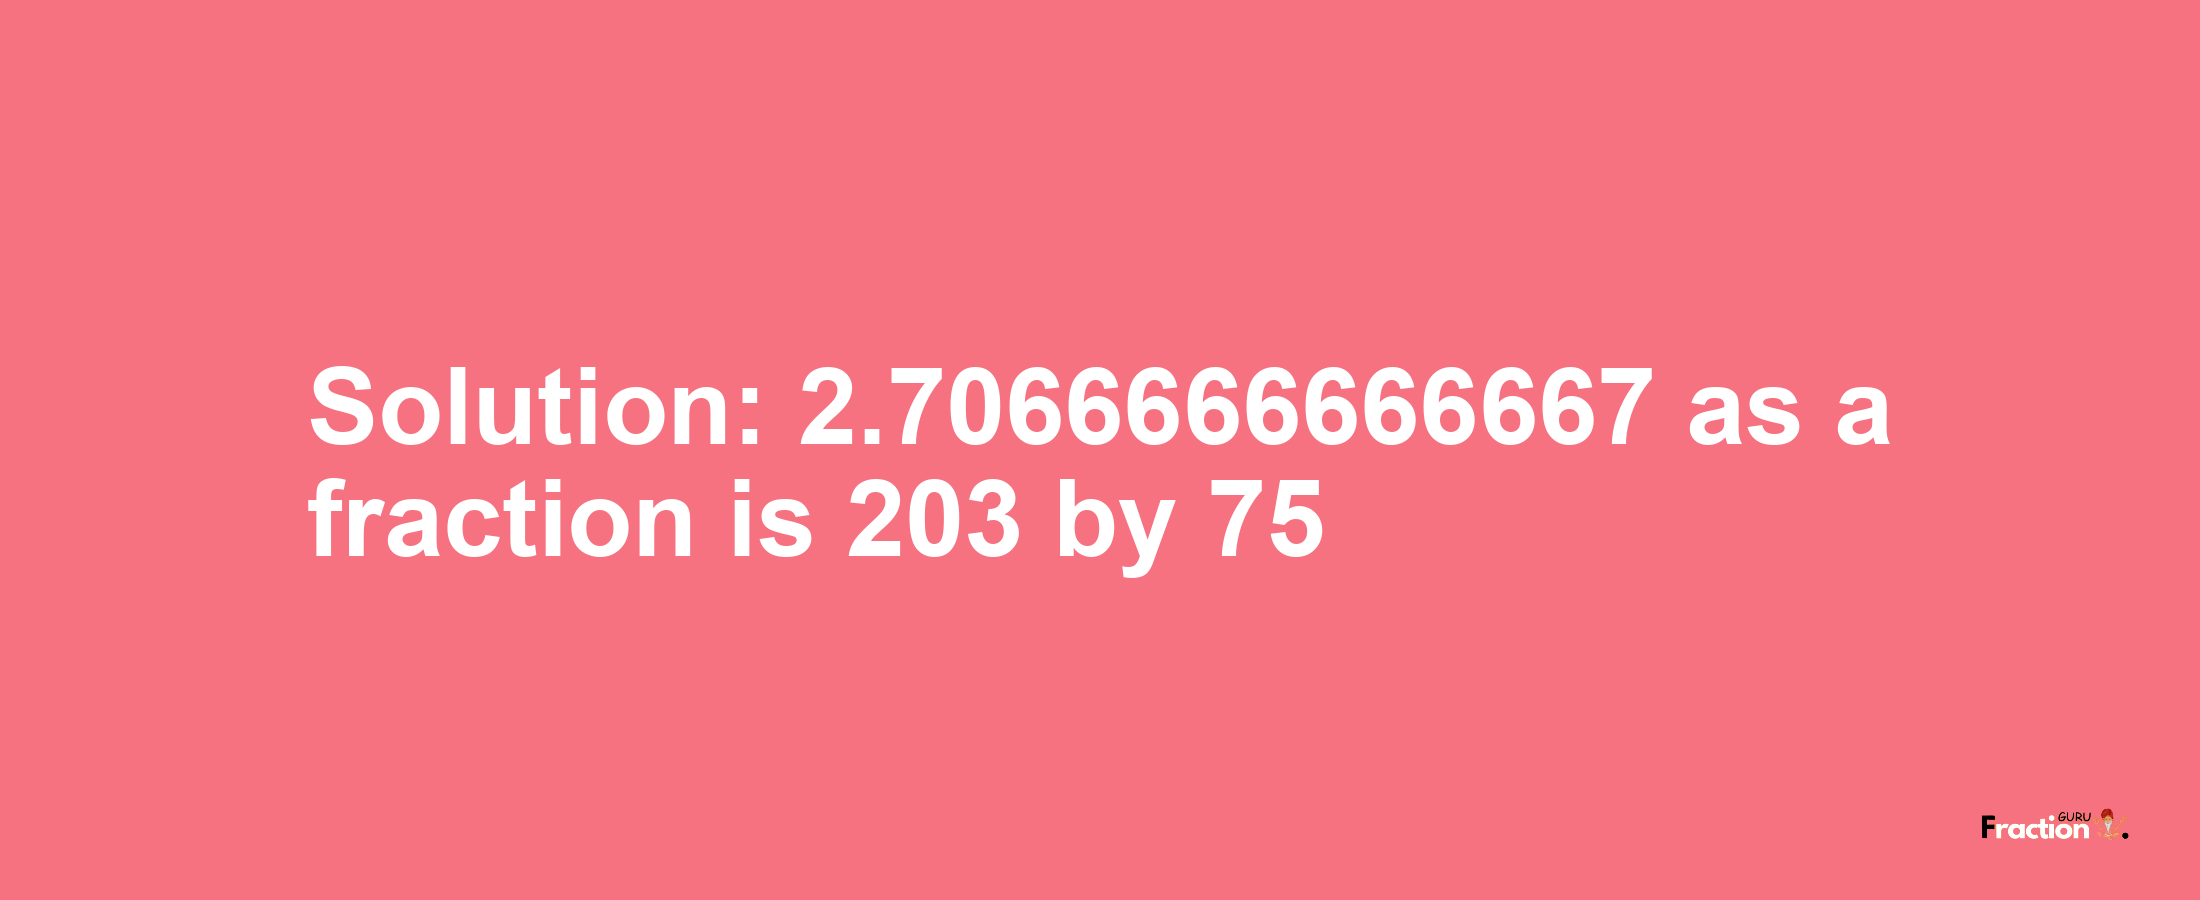 Solution:2.7066666666667 as a fraction is 203/75